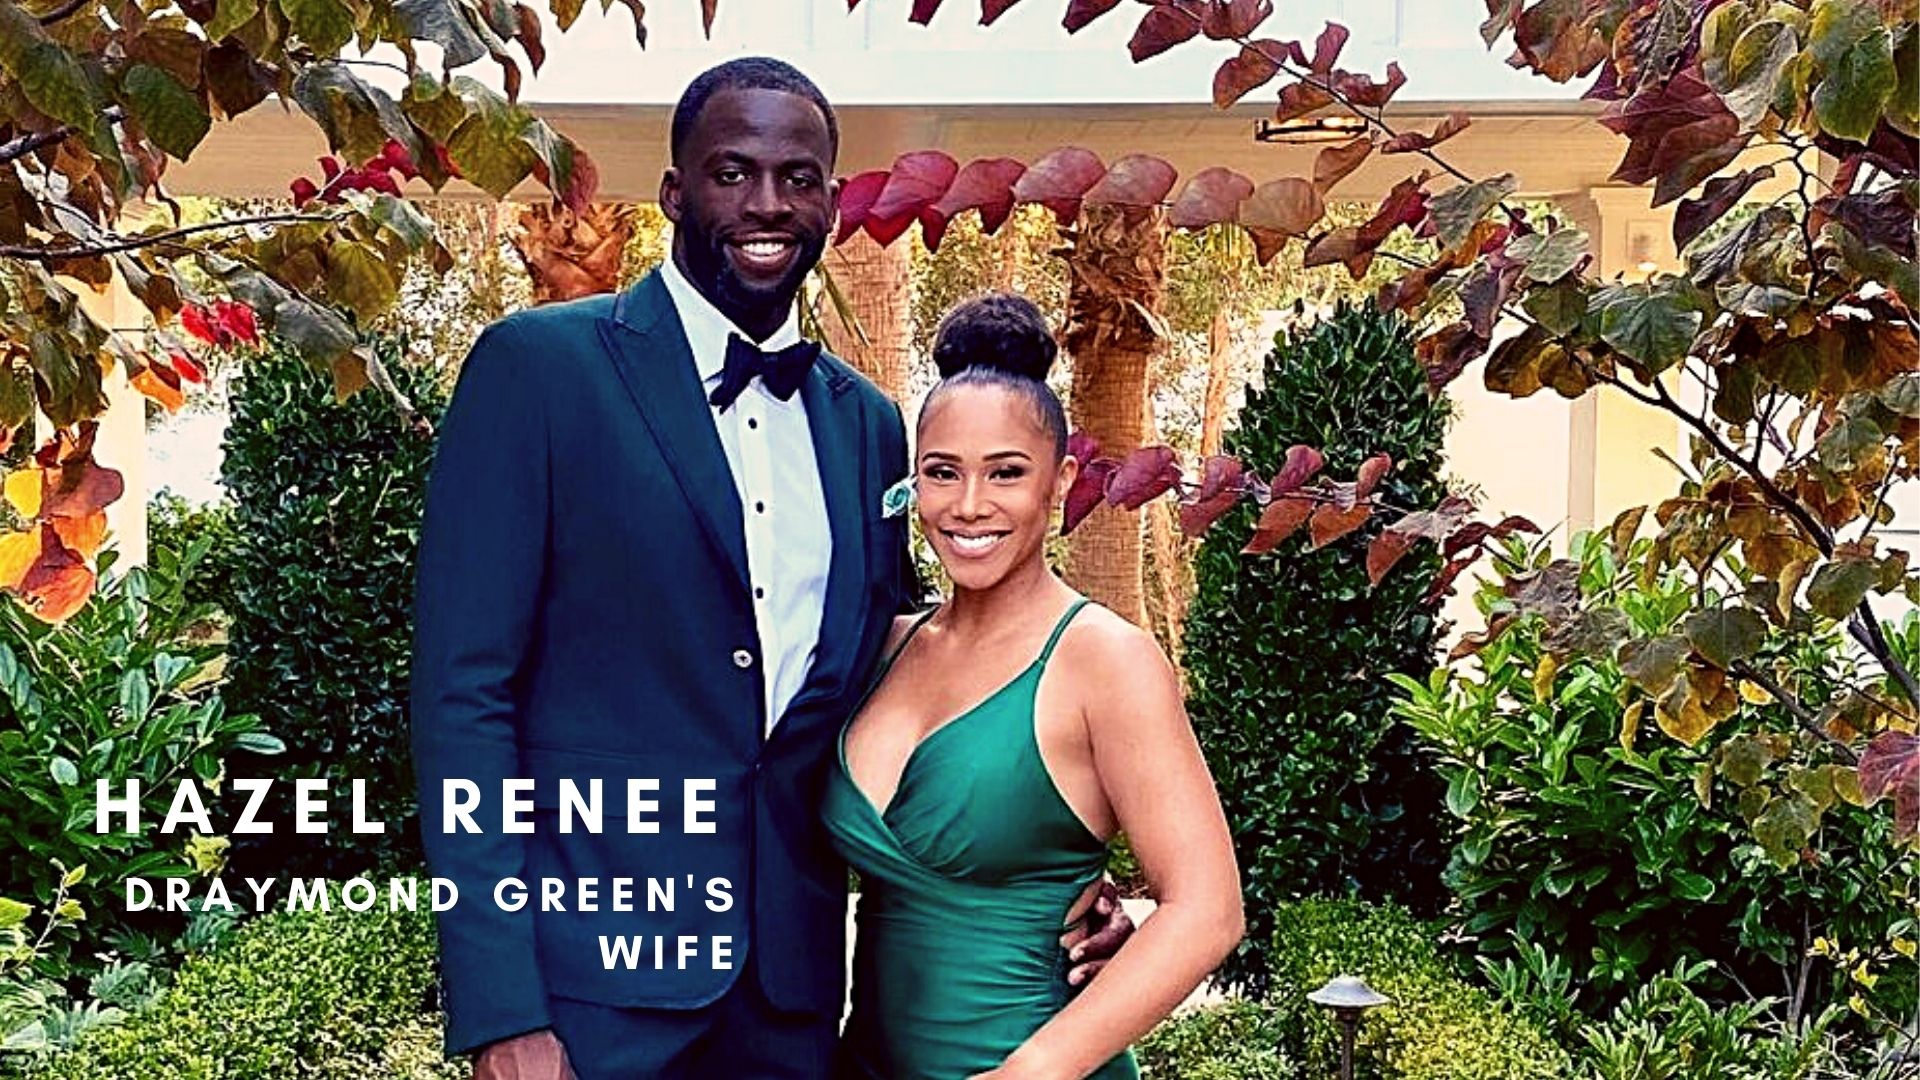 NBA Champ Draymond Green On Staying Connected To His Family During The  Season, And Why Fiancée Hazel Renee Is His MVP